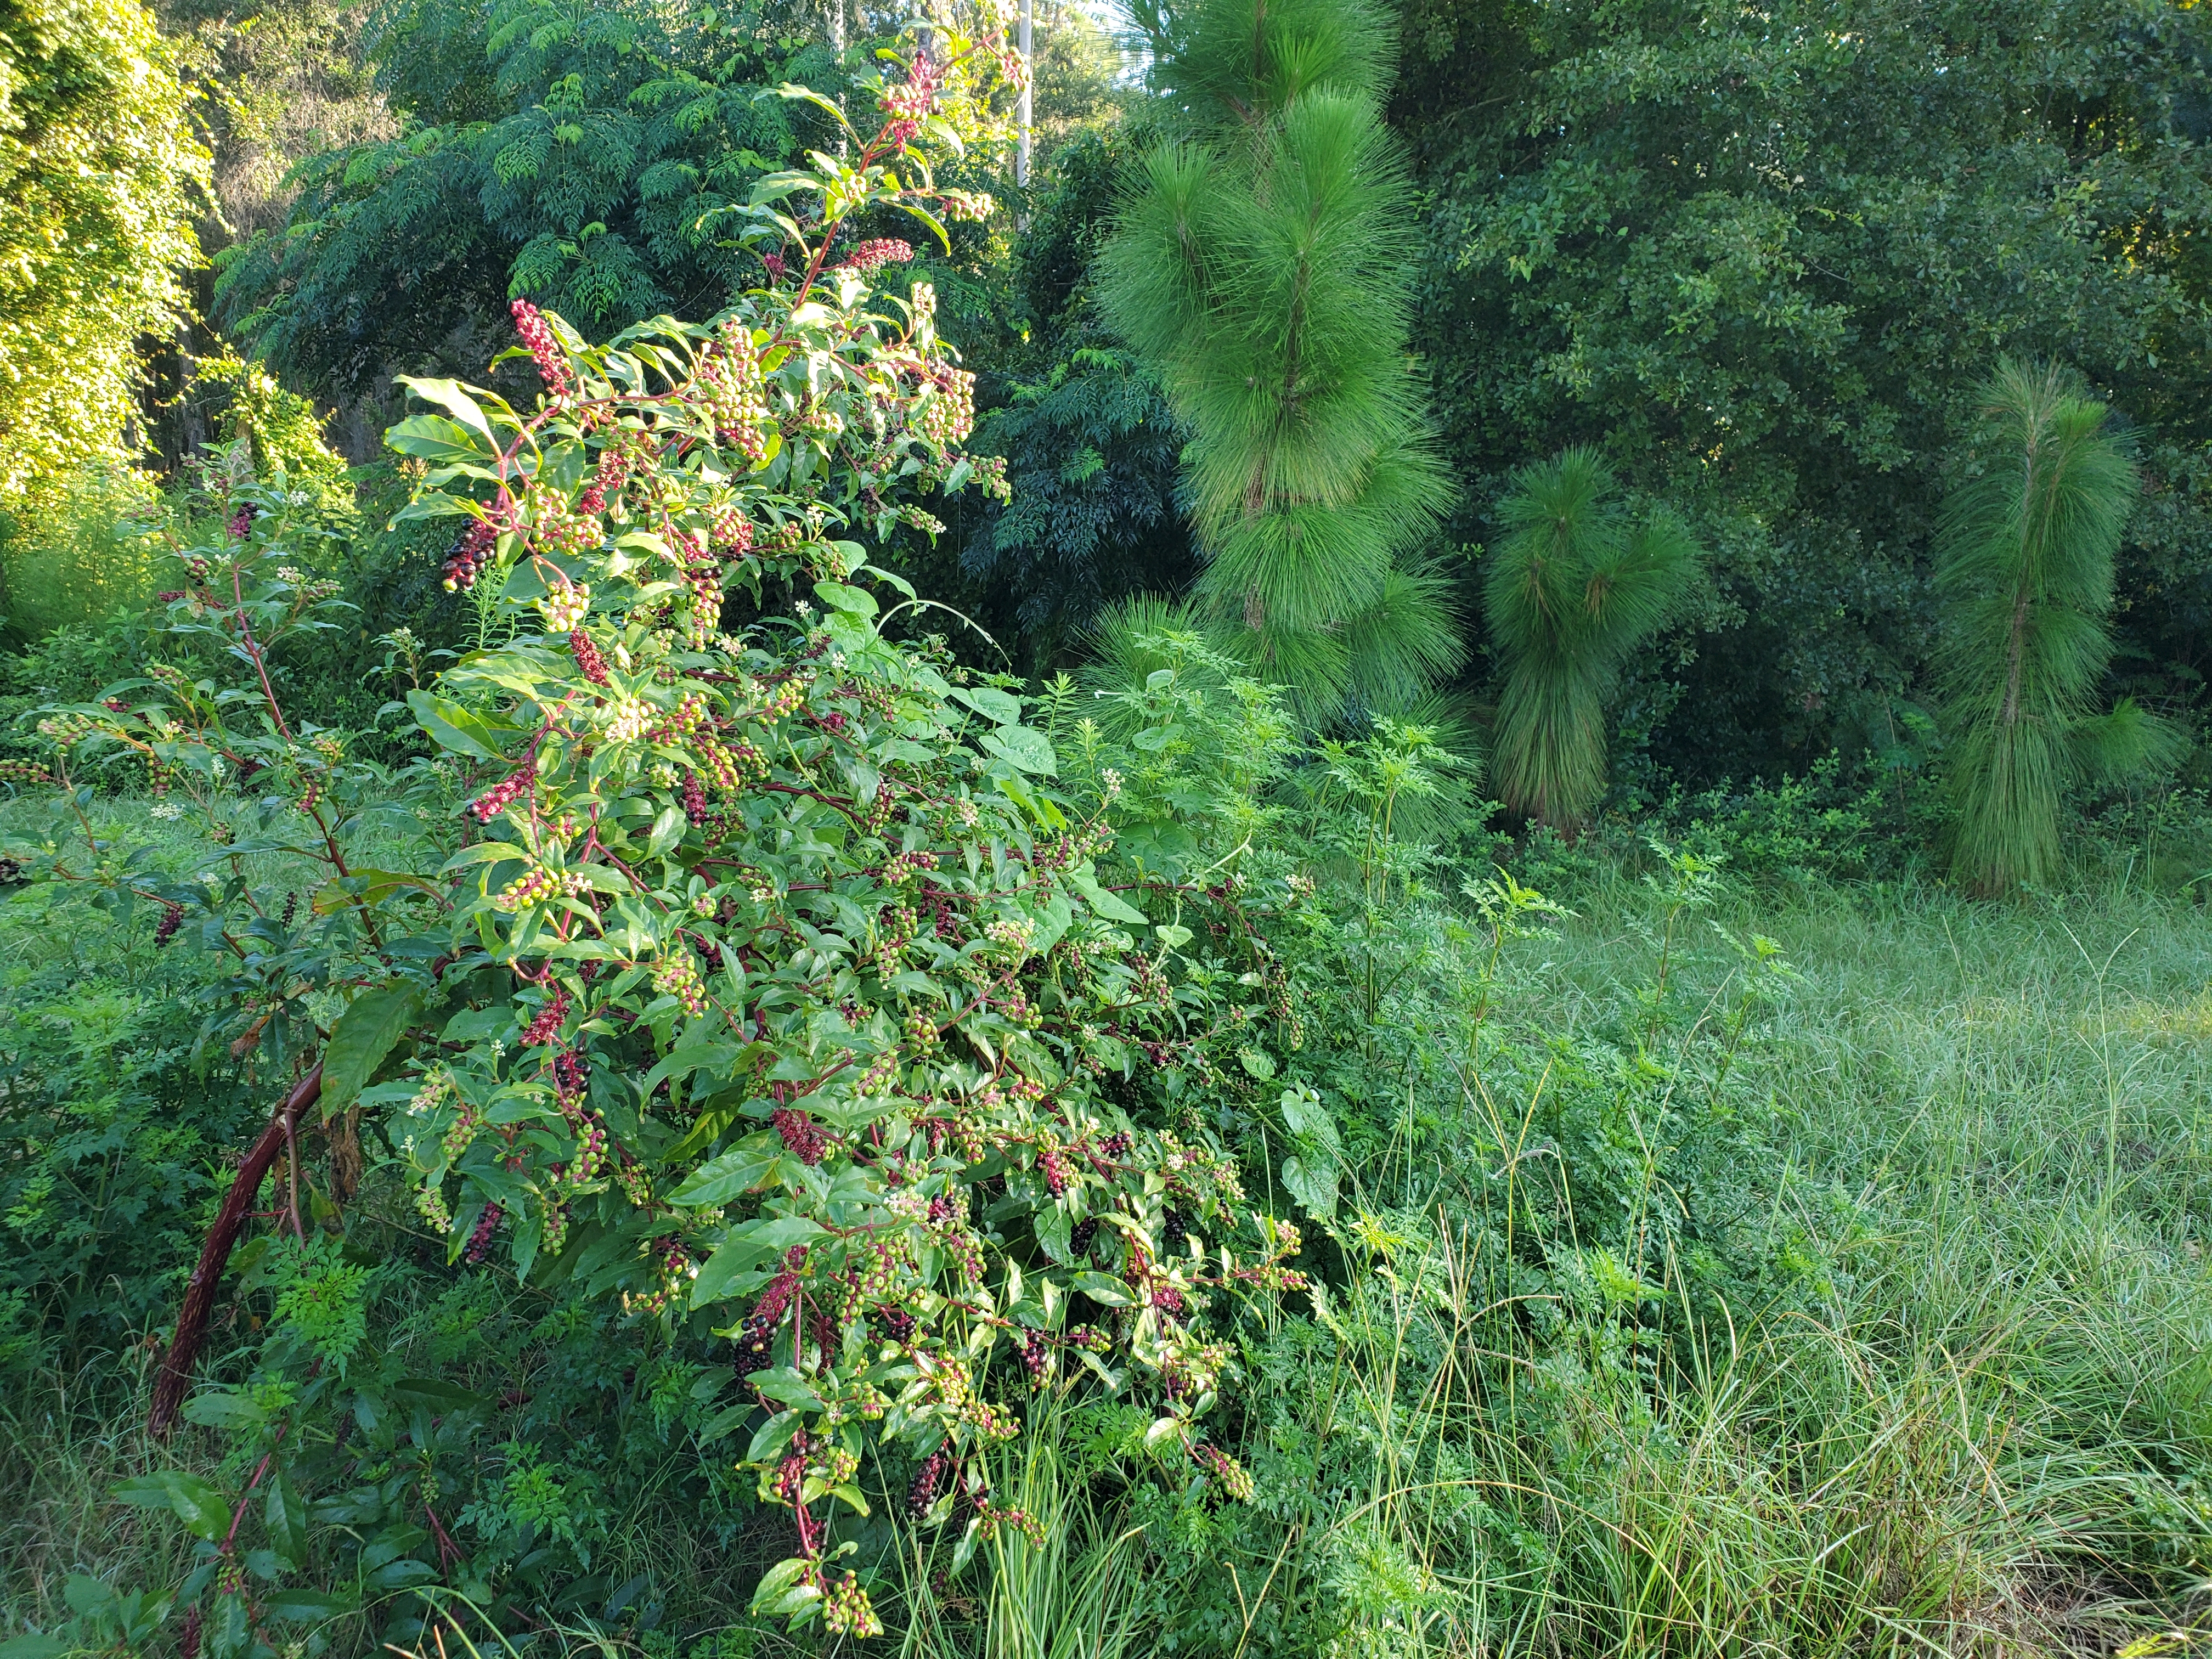 Pokeberry with more longleaf and chinaberry